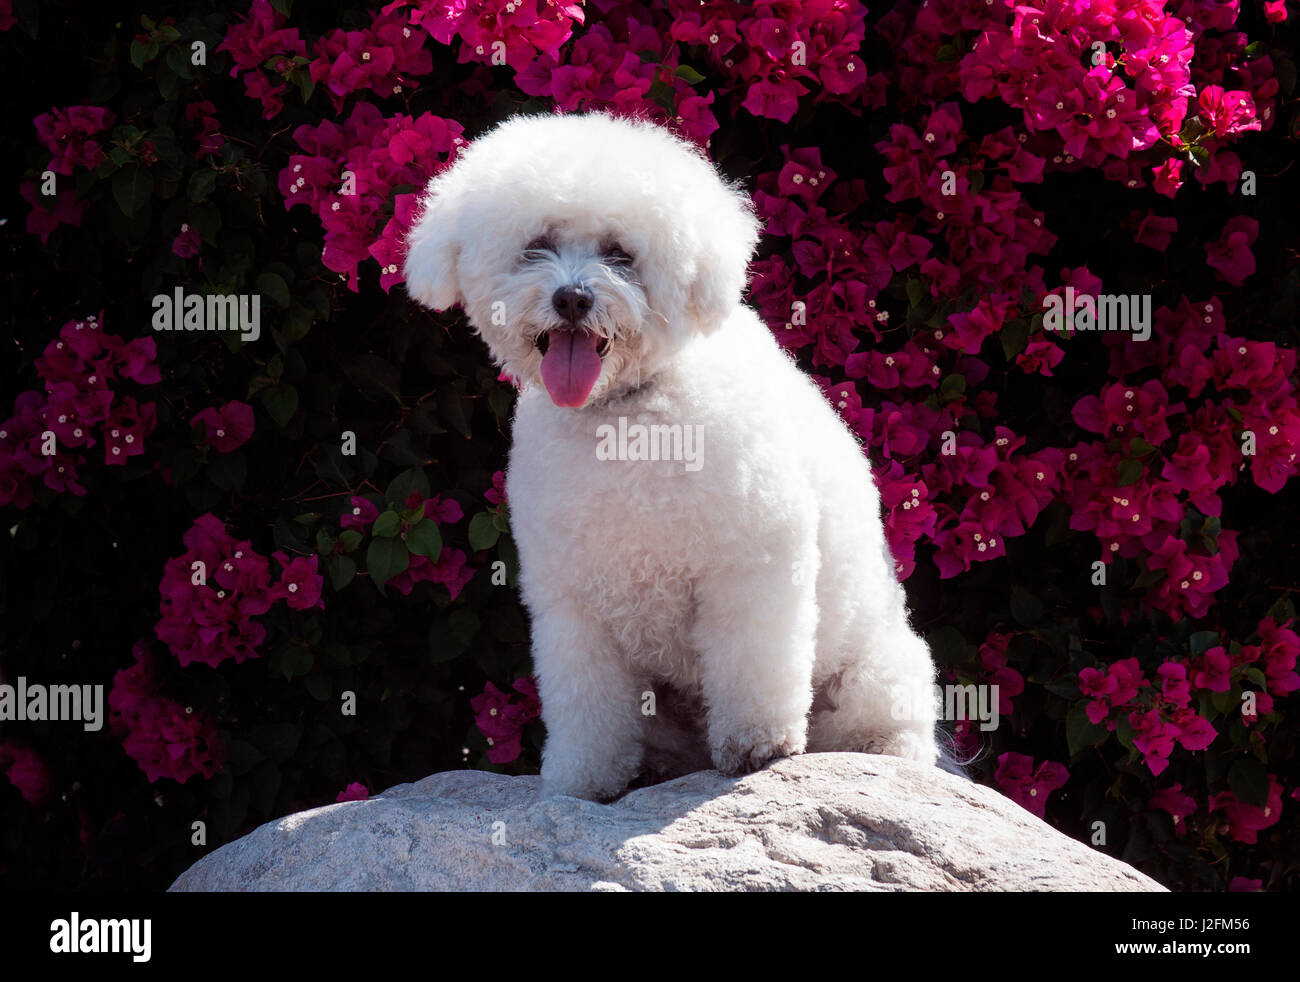 Bichon Frise sitting on a rock in front of flowers (MR) Stock Photo